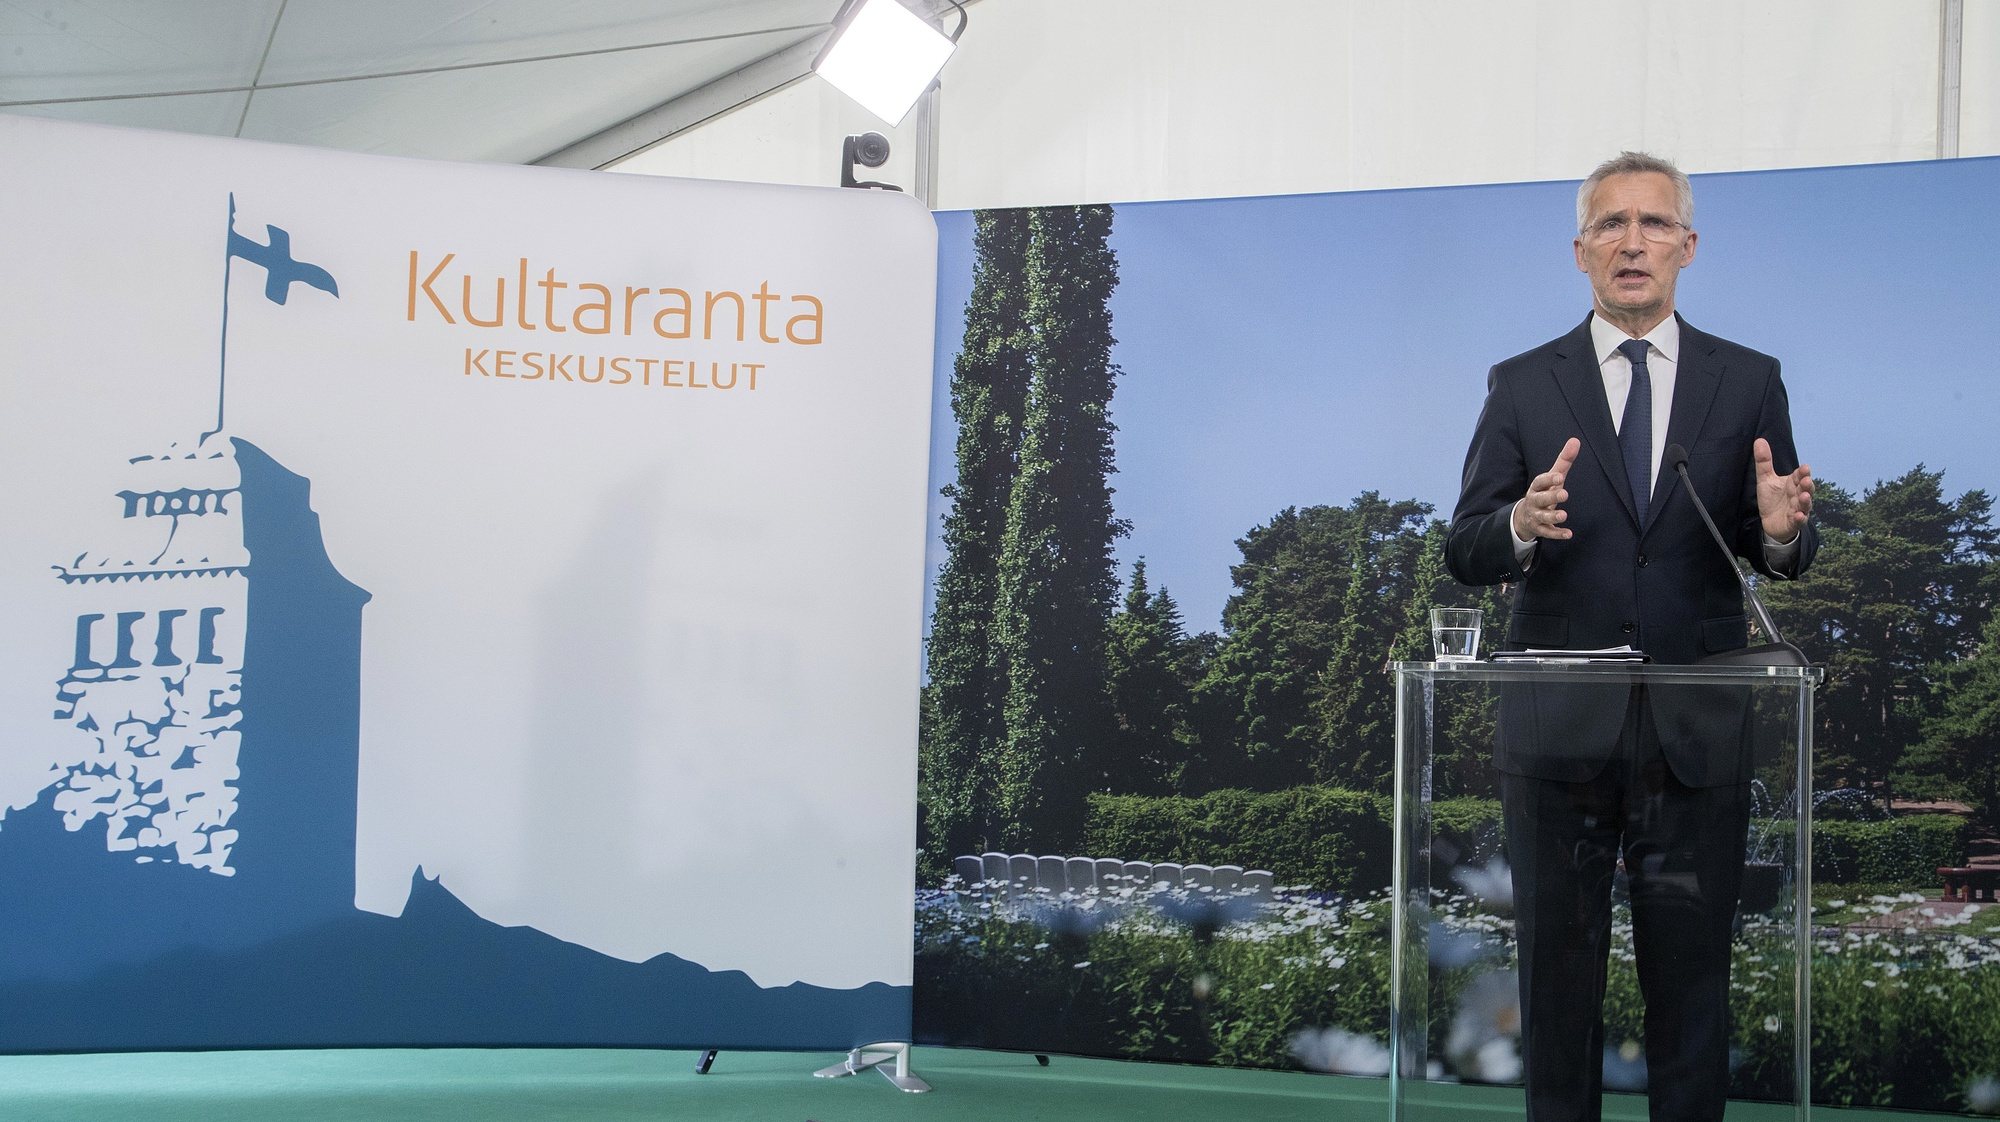 epa10009614 Nato Secretary General Jens Stoltenberg during a press conference at The Kultaranta Talks in Naantali Finland, Finland, 12 June 2022. The Kultaranta Talks is being hosted by President Sauli Niinisto on 12-13 June 2022. This year, the title of this foreing and security policy discussion event is &#039;Responsible, strong and stable Nordic region&#039;. The main guests are NATO Secretary General Jens Stoltenberg and Prime Minister of Norway Jonas Gahr Store at the Presidential summer residence Kultaranta, located on the island of Luonnonmaa.  EPA/MAURI RATILAINEN